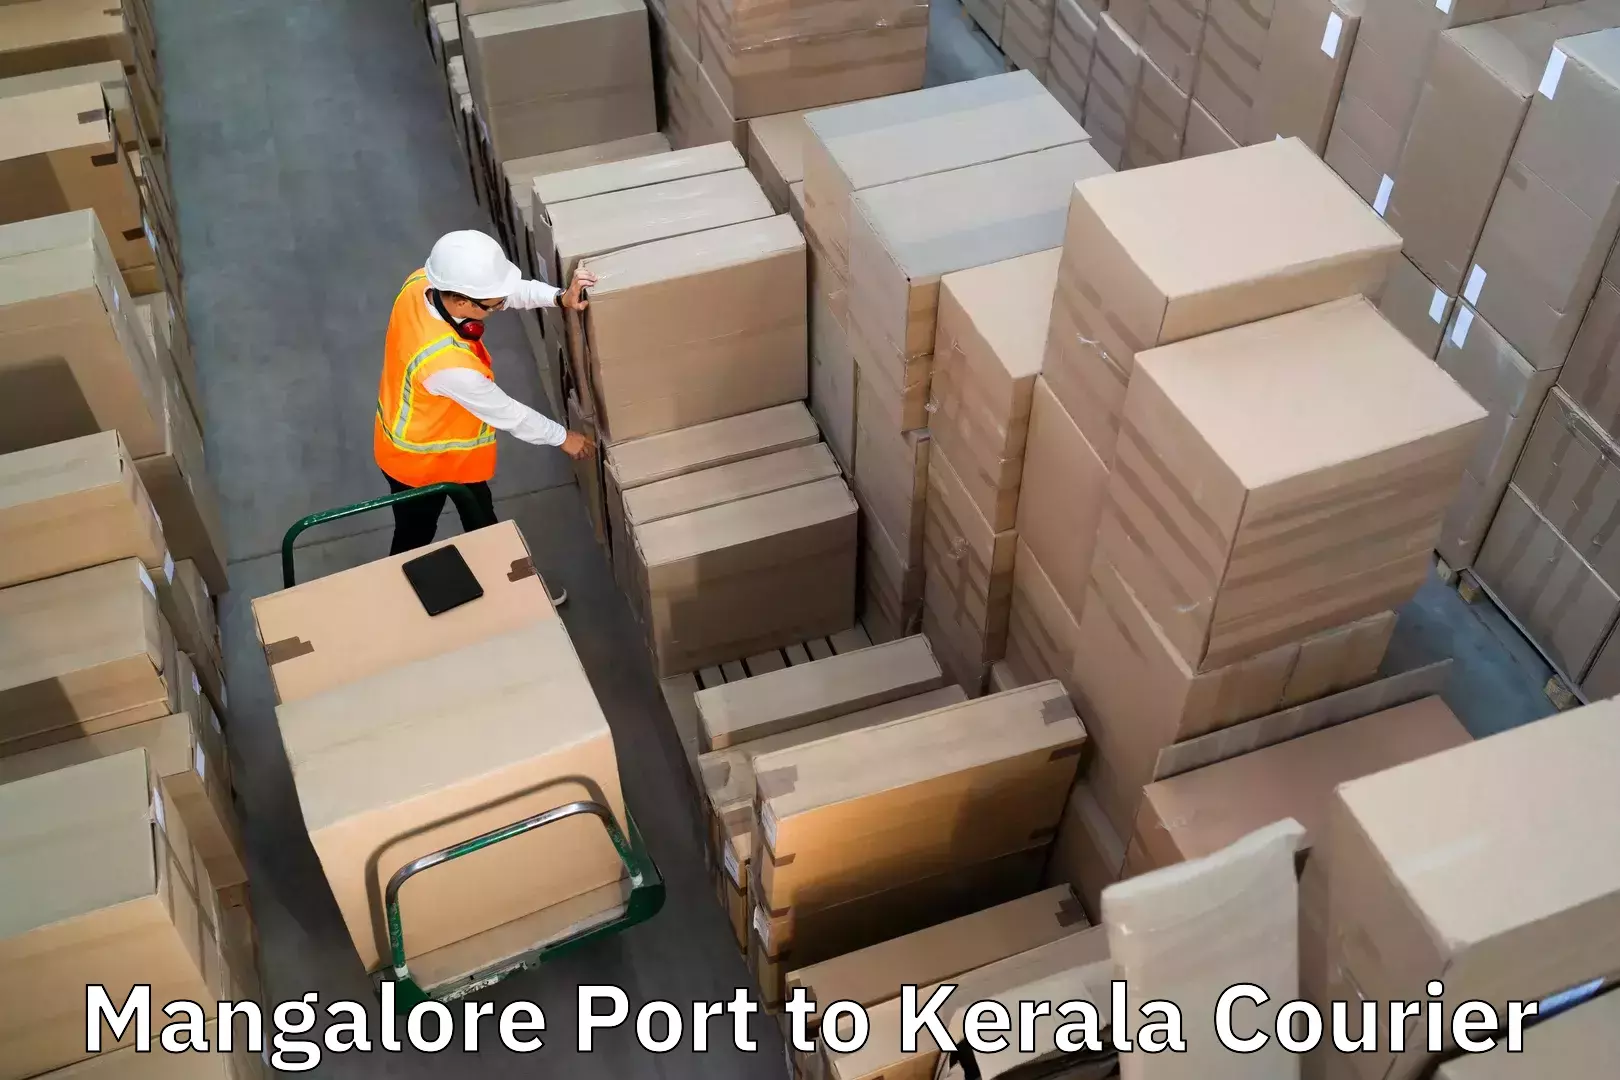 Luggage transport solutions Mangalore Port to Kerala